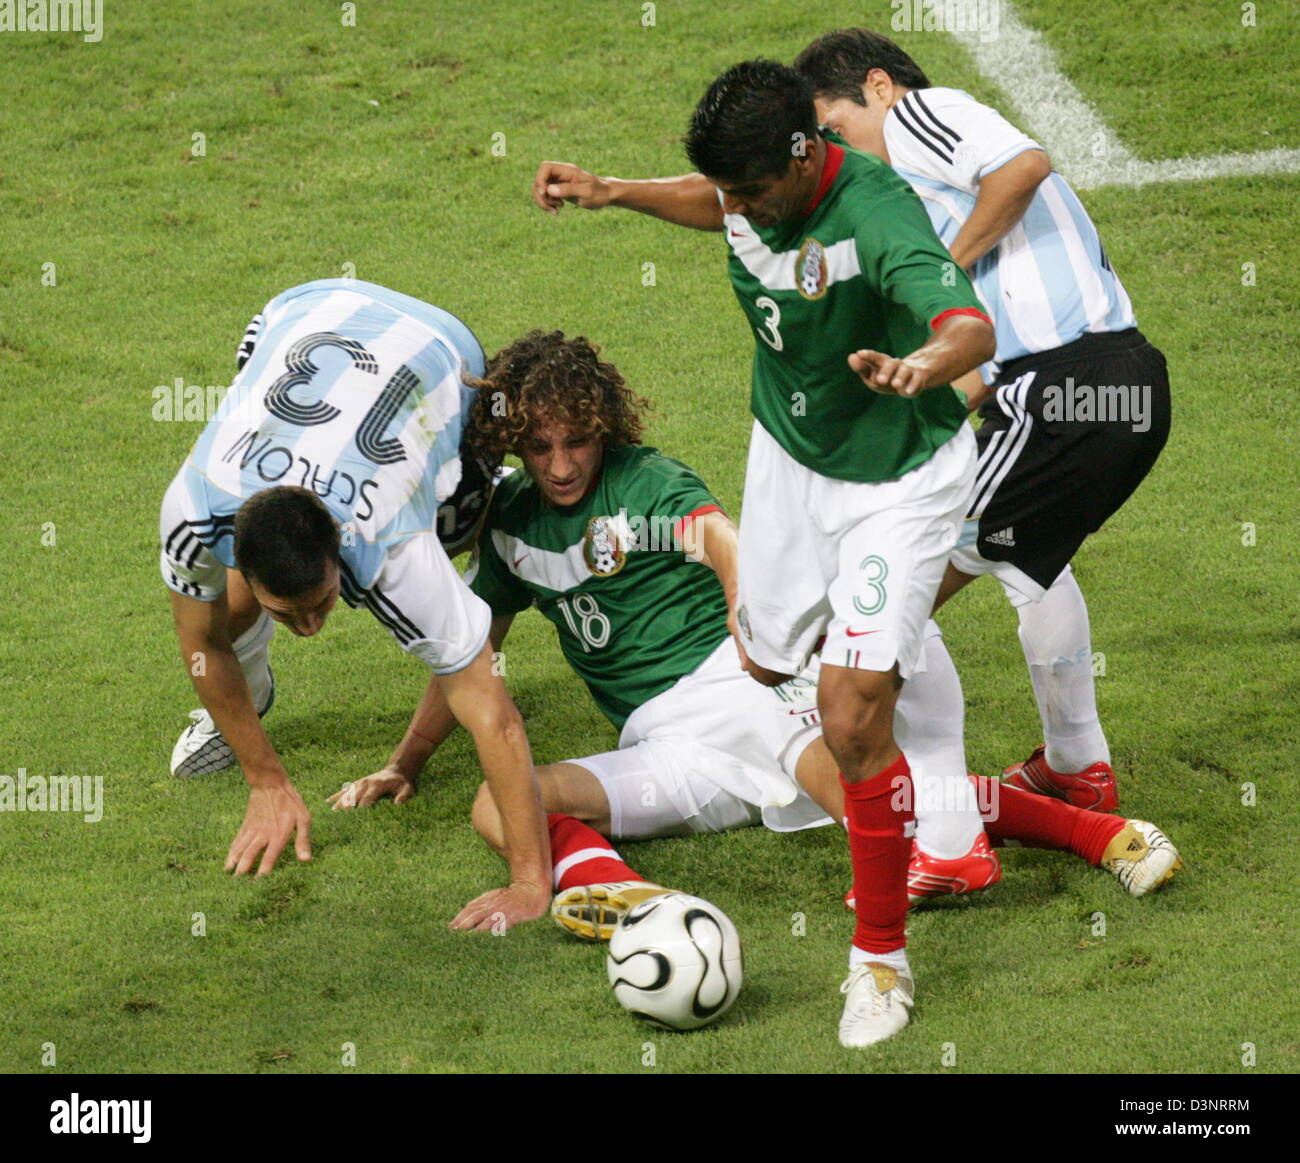 (L-R) Lionel Scaloni of Argentina vies for the ball with Andres Guardado (C) and Juan Sorin of Mexico during the 2006 FIFA World Cup Round of 16 match Argentina vs Mexico at the FIFA World Cup stadium in Leipzig, Germany, Saturday 24 June 2006. DPA/JENS WOLF +++ Mobile Services OUT +++ Please refer to FIFA's Terms and Conditions. +++(c) dpa - Bildfunk+++ Stock Photo